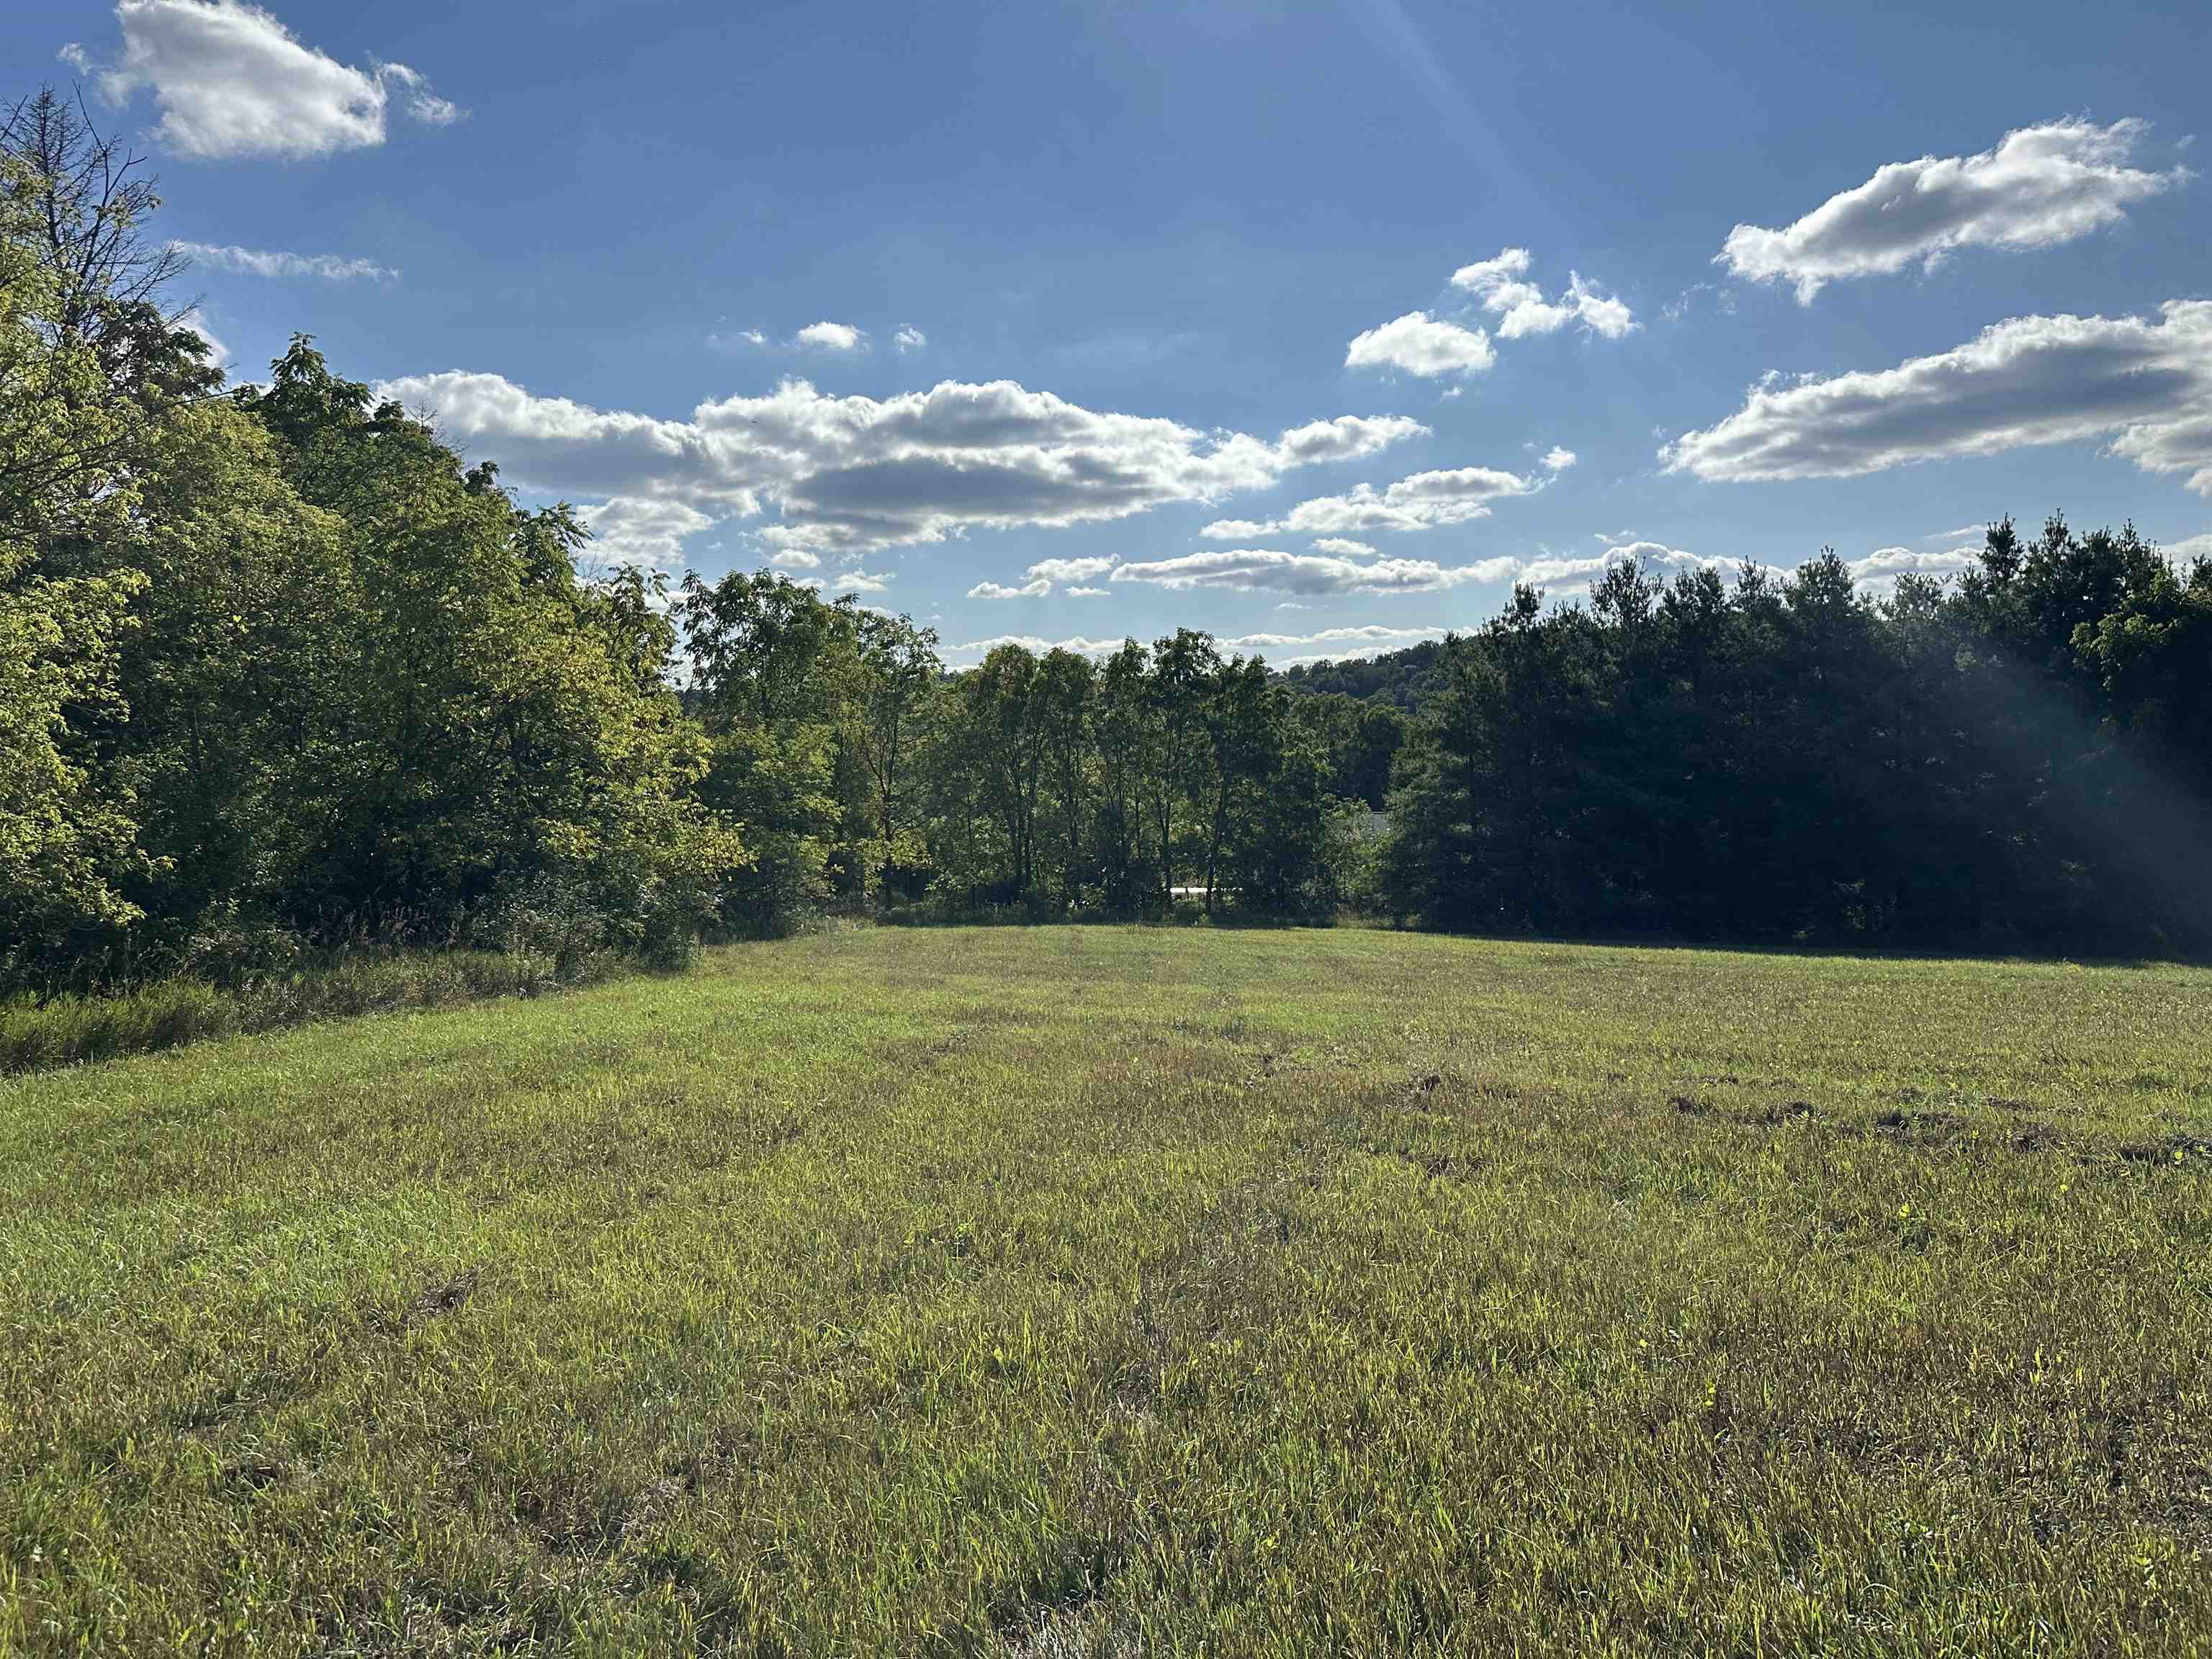 Bring your own builder to this private and partially wooded 1.89 acre lot at the end of a cul de sac.  The rolling hills and quiet of the Driftless region are on beautiful display on this picturesque lot.  Walk down the hill into Mount Vernon, or drive 10 minutes to Verona/Epic, or 20 minutes to downtown Madison.  The gentle slope of the lot allows for significant lower level exposure.